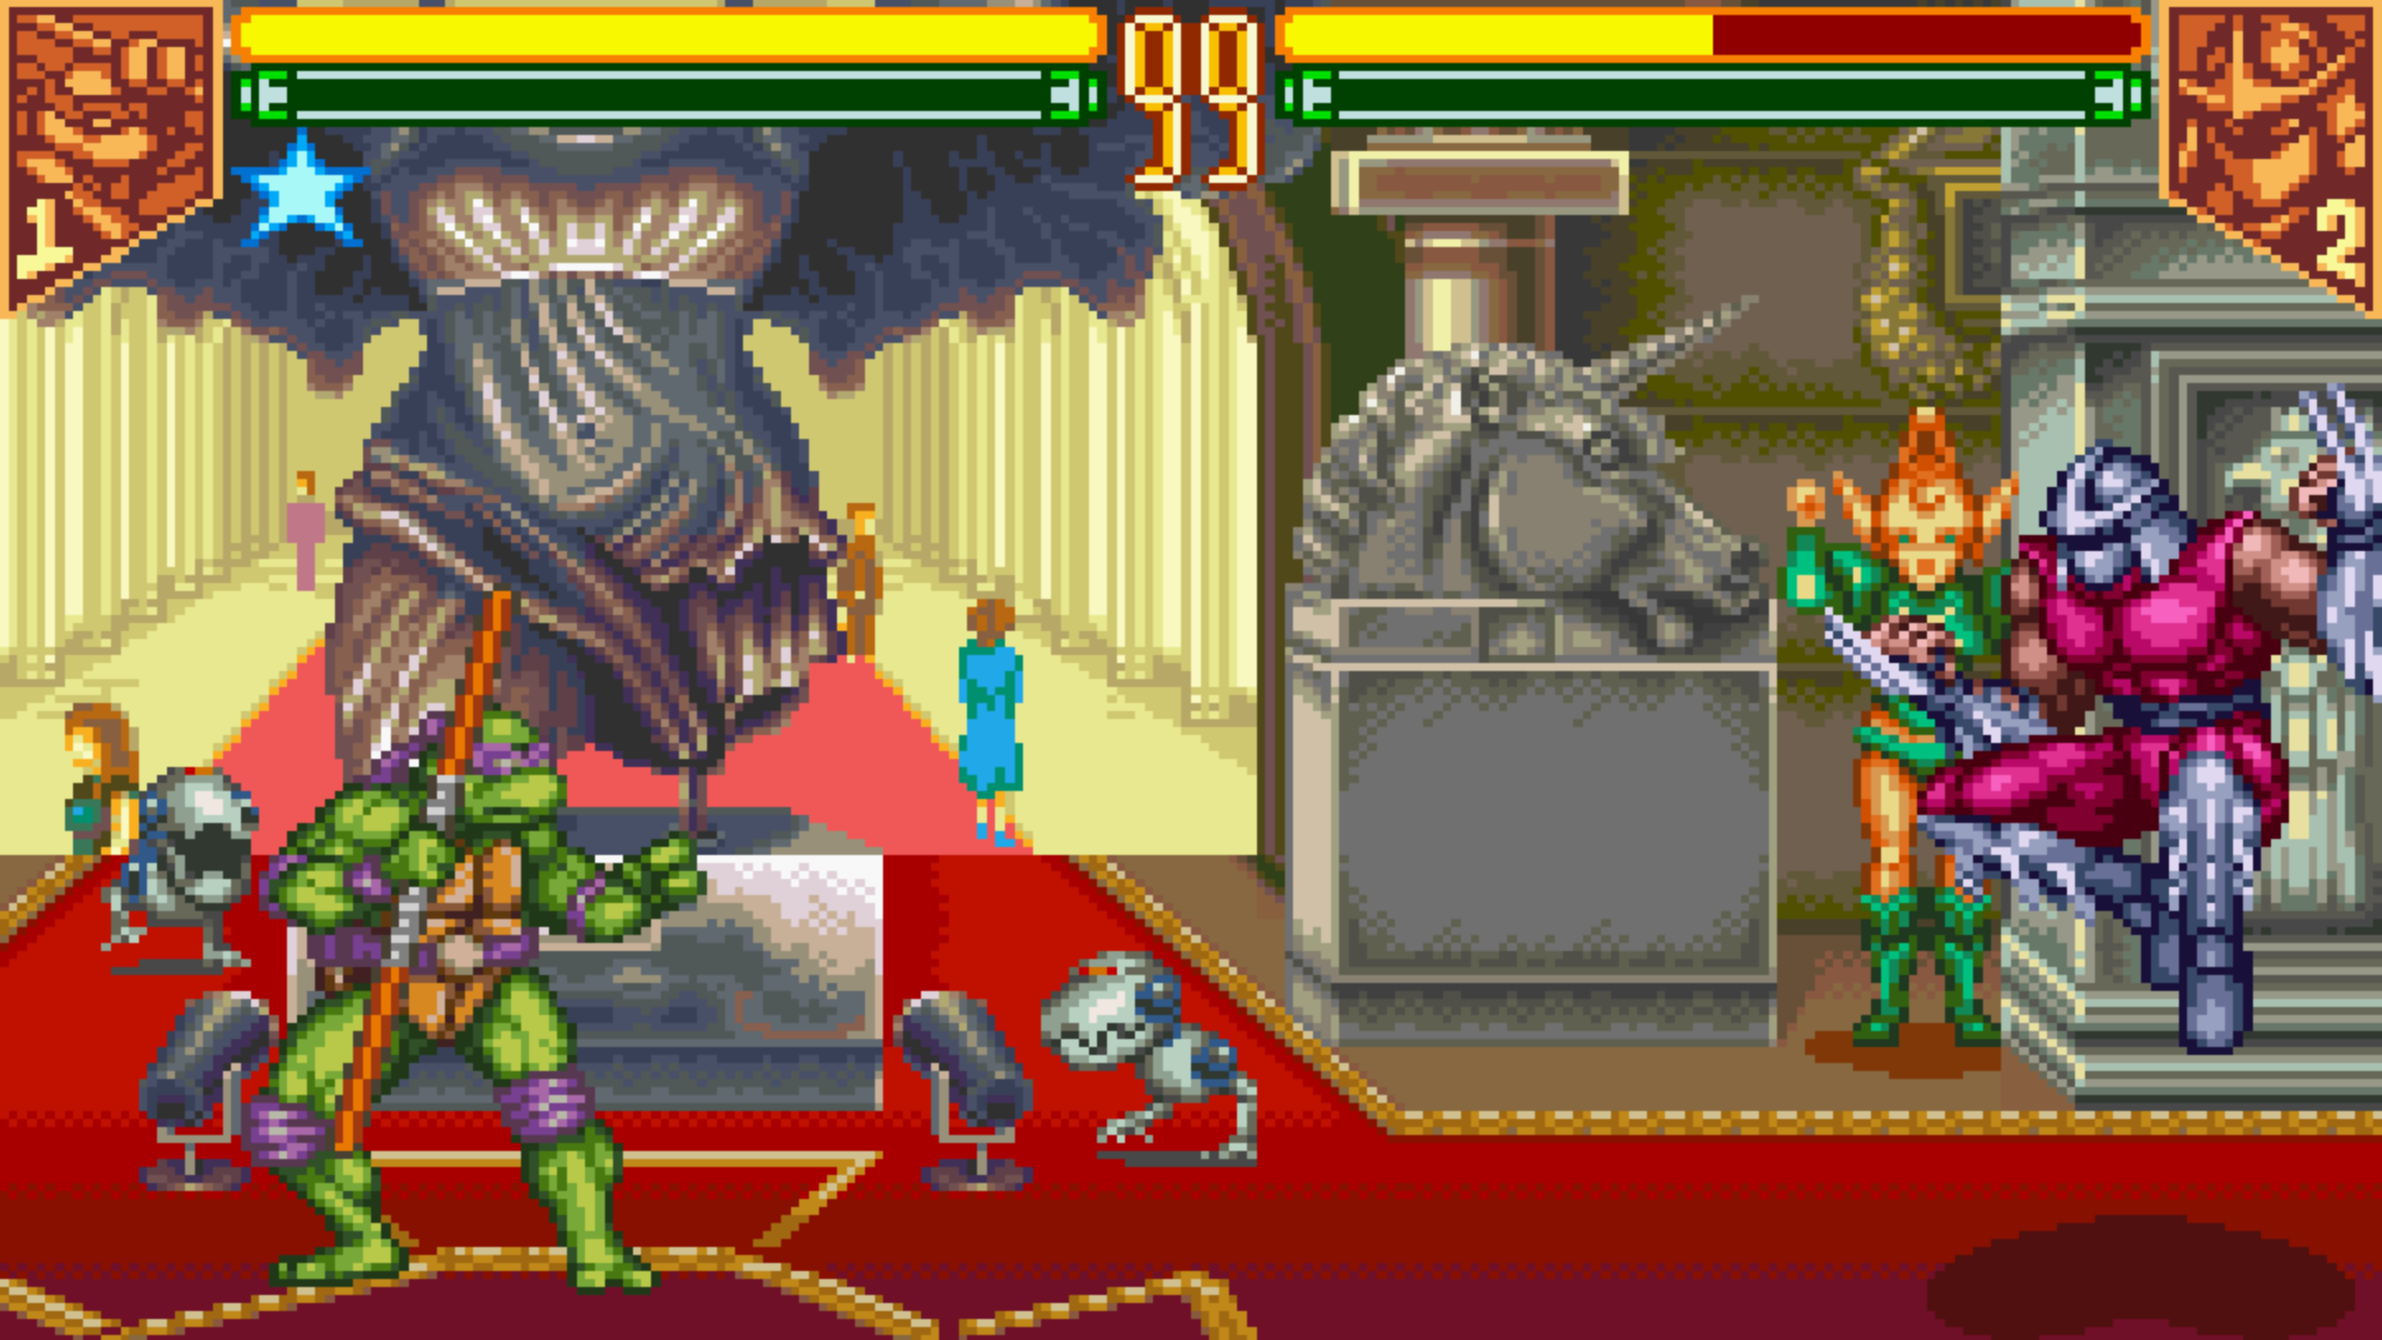 Donatello and Shredder fight in a screenshot of Teenage Mutant Ninja Turtles: Tournament Fighters from Teenage Mutant Ninja Turtles: The Cowabunga Collection.